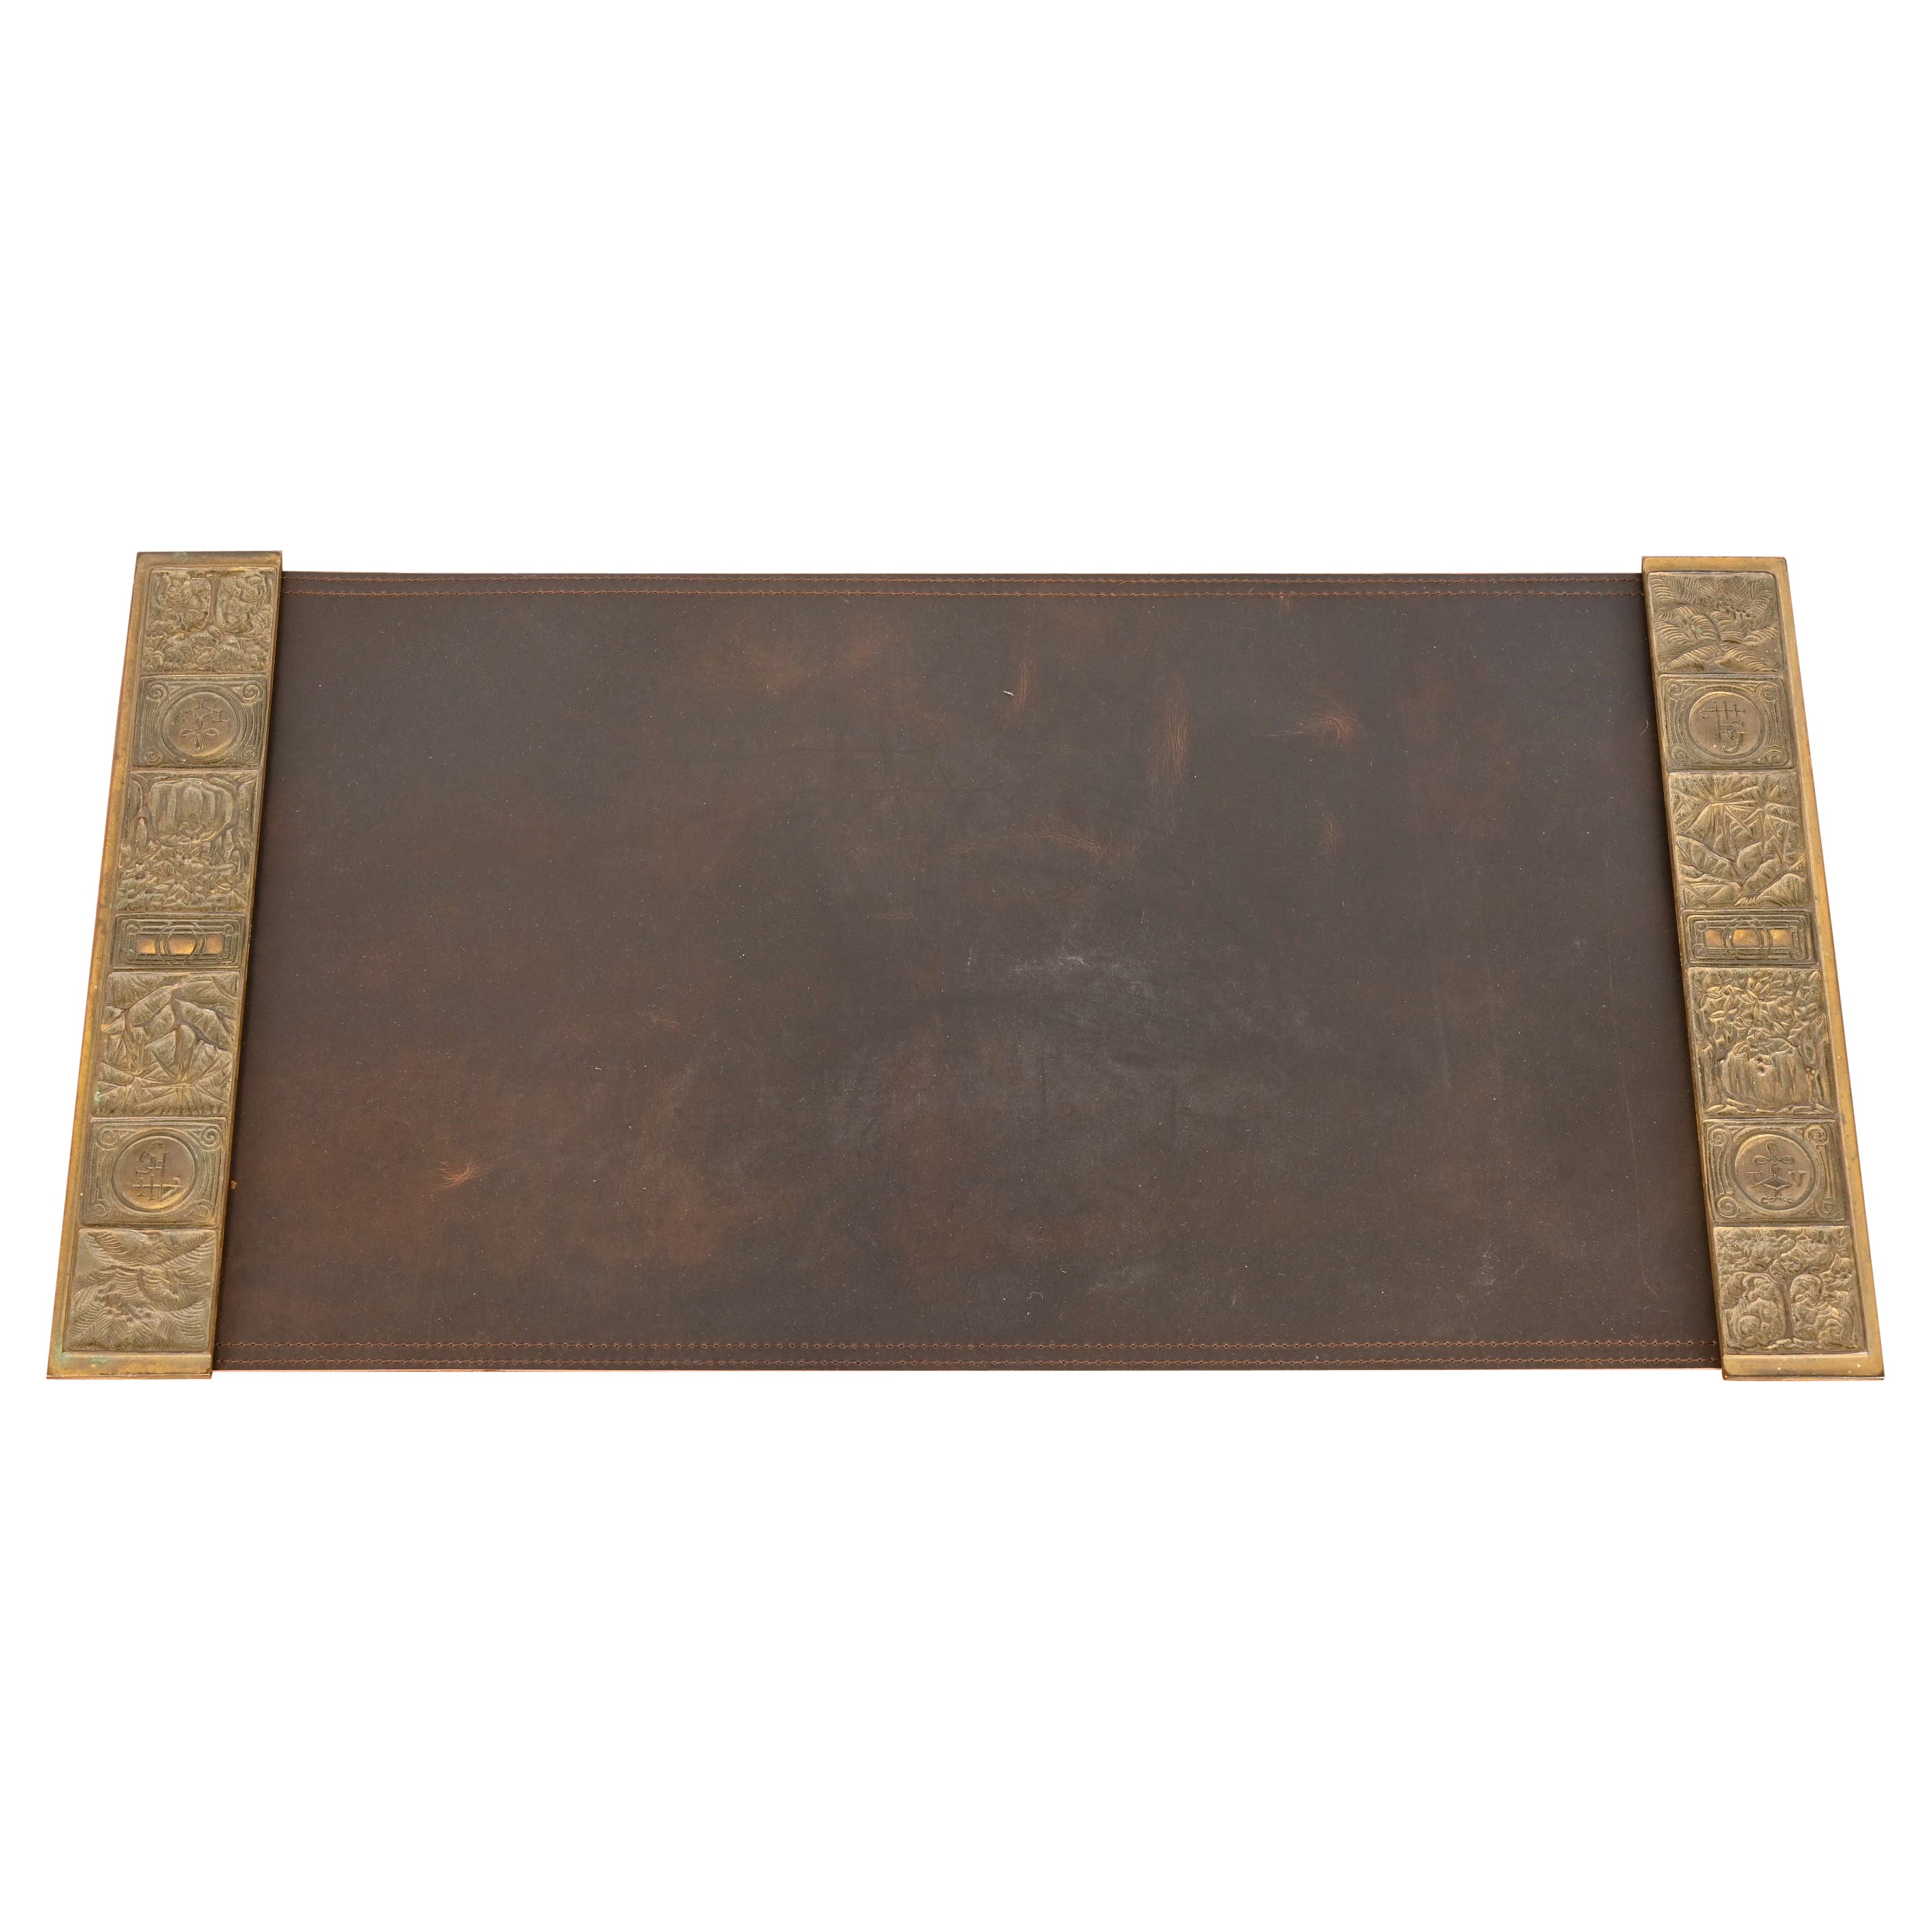 Tiffany Studios New York Bookmark Bronze Blotter Ends With Leather Desk Pad For Sale